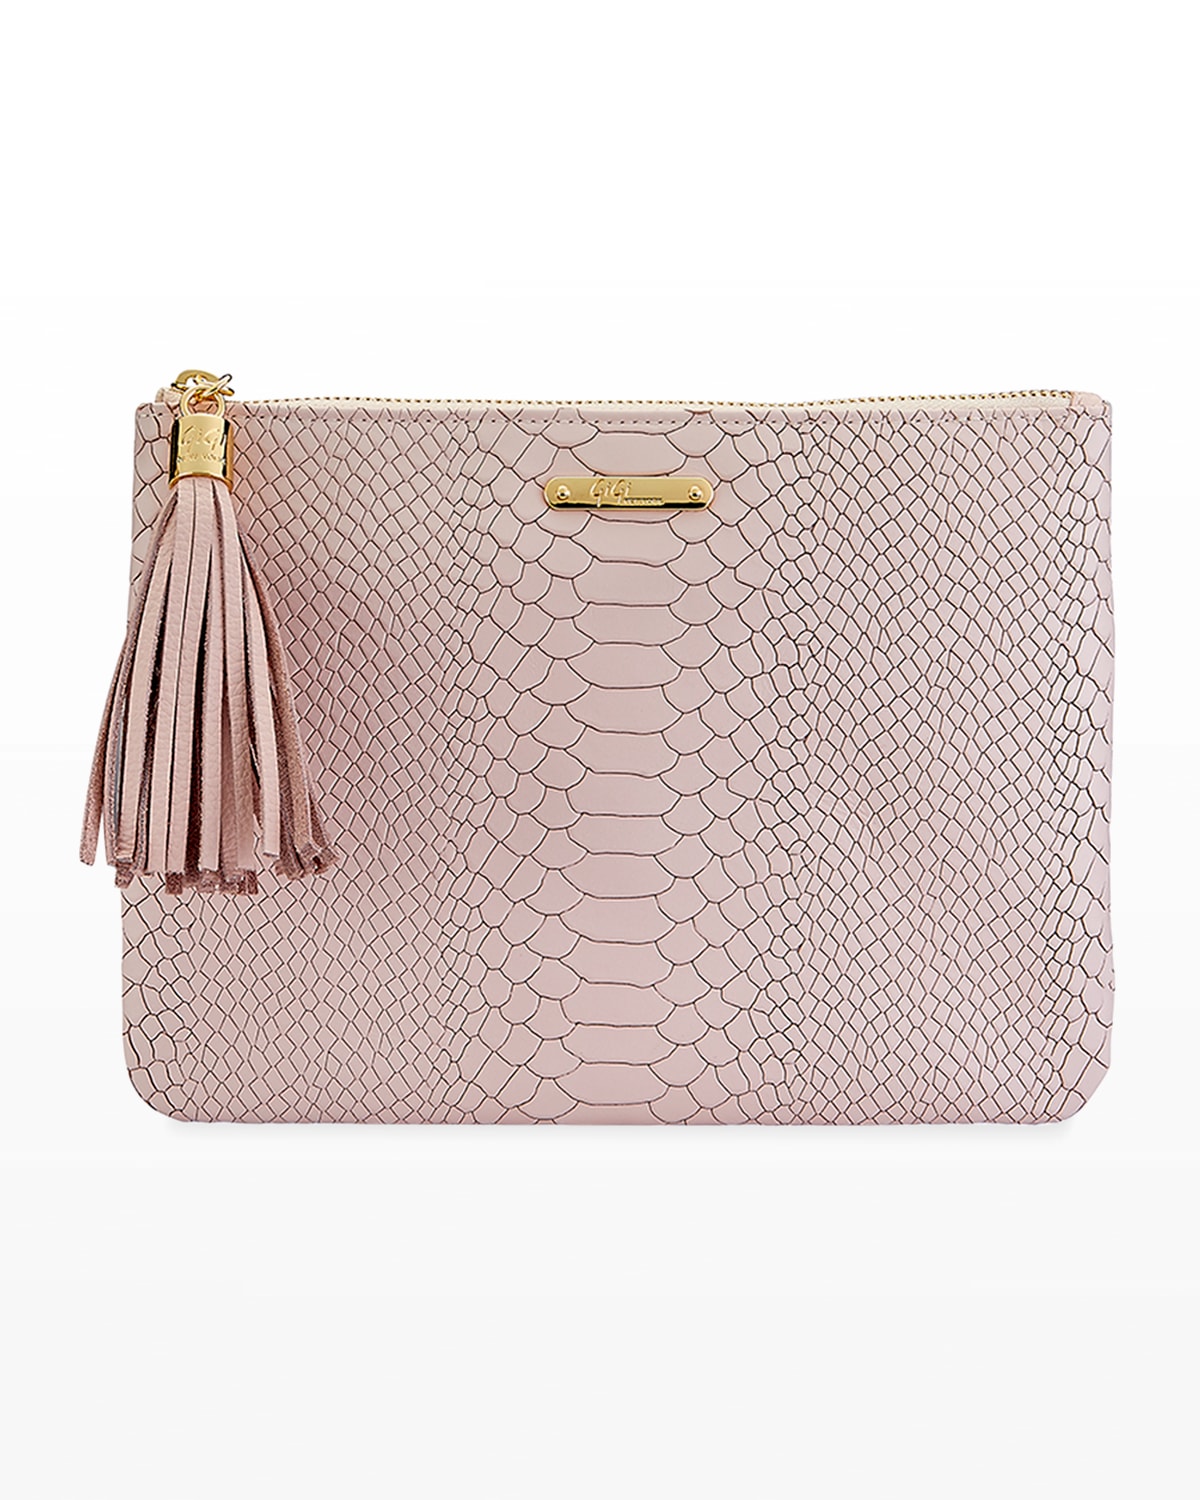 Gigi New York All In One Python-Embossed Clutch Bag